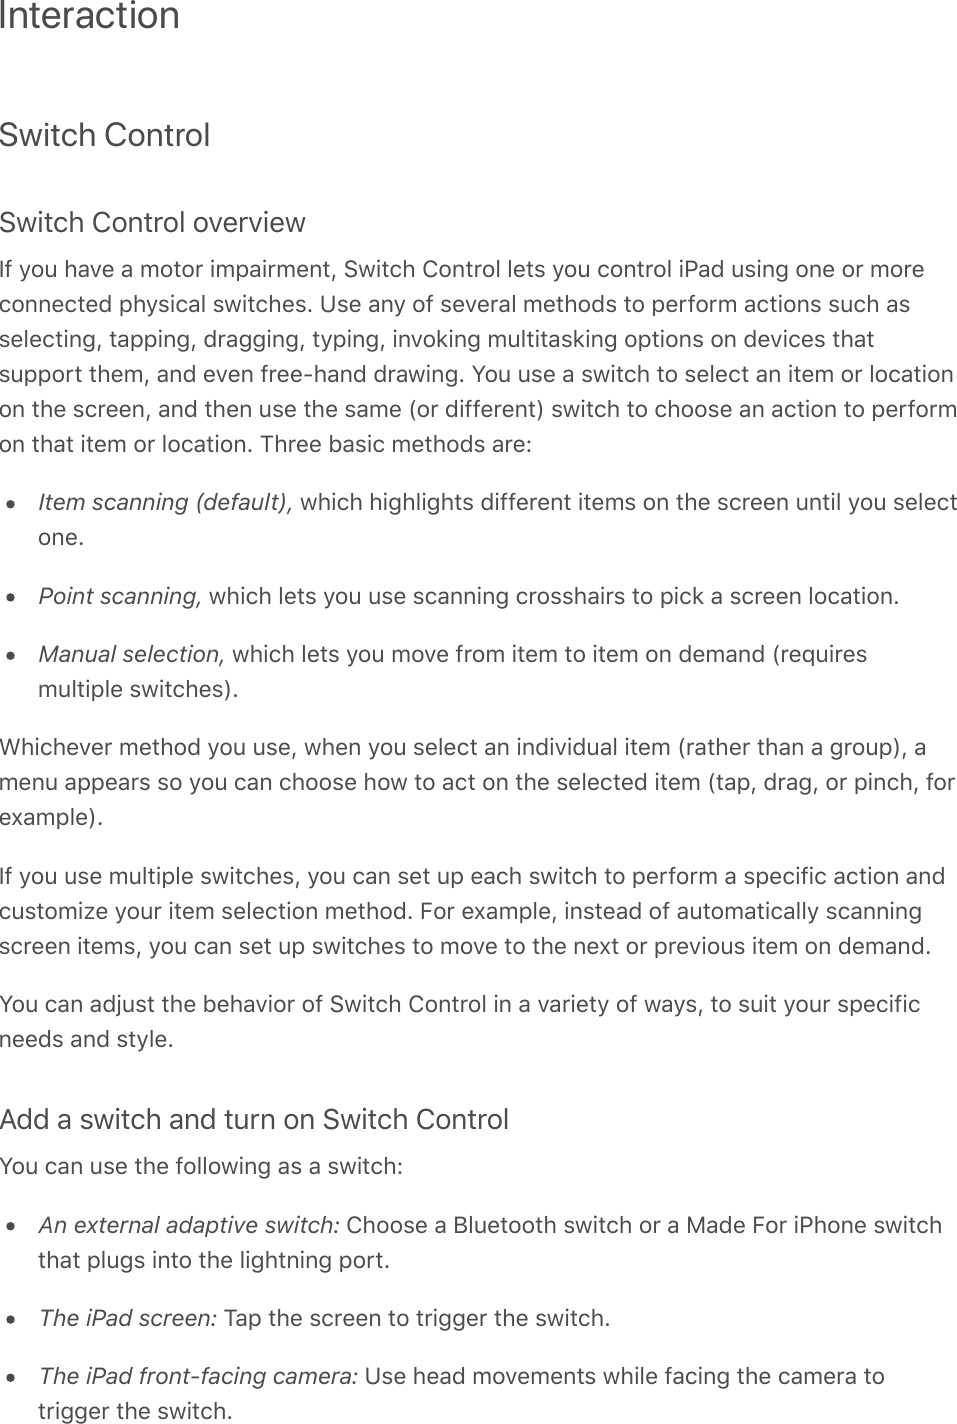 InteractionSwitch ControlSwitch Control overviewIf you have a motor impairment, Switch Control lets you control iPad using one or moreconnected physical switches. Use any of several methods to perform actions such asselecting, tapping, dragging, typing, invoking multitasking options on devices thatsupport them, and even free-hand drawing. You use a switch to select an item or locationon the screen, and then use the same (or different) switch to choose an action to performon that item or location. Three basic methods are:Item scanning (default), which highlights different items on the screen until you selectone.Point scanning, which lets you use scanning crosshairs to pick a screen location.Manual selection, which lets you move from item to item on demand (requiresmultiple switches).Whichever method you use, when you select an individual item (rather than a group), amenu appears so you can choose how to act on the selected item (tap, drag, or pinch, forexample).If you use multiple switches, you can set up each switch to perform a specific action andcustomize your item selection method. For example, instead of automatically scanningscreen items, you can set up switches to move to the next or previous item on demand.You can adjust the behavior of Switch Control in a variety of ways, to suit your specificneeds and style.Add a switch and turn on Switch ControlYou can use the following as a switch:An external adaptive switch: Choose a Bluetooth switch or a Made For iPhone switchthat plugs into the lightning port.The iPad screen: Tap the screen to trigger the switch.The iPad front-facing camera: Use head movements while facing the camera totrigger the switch.